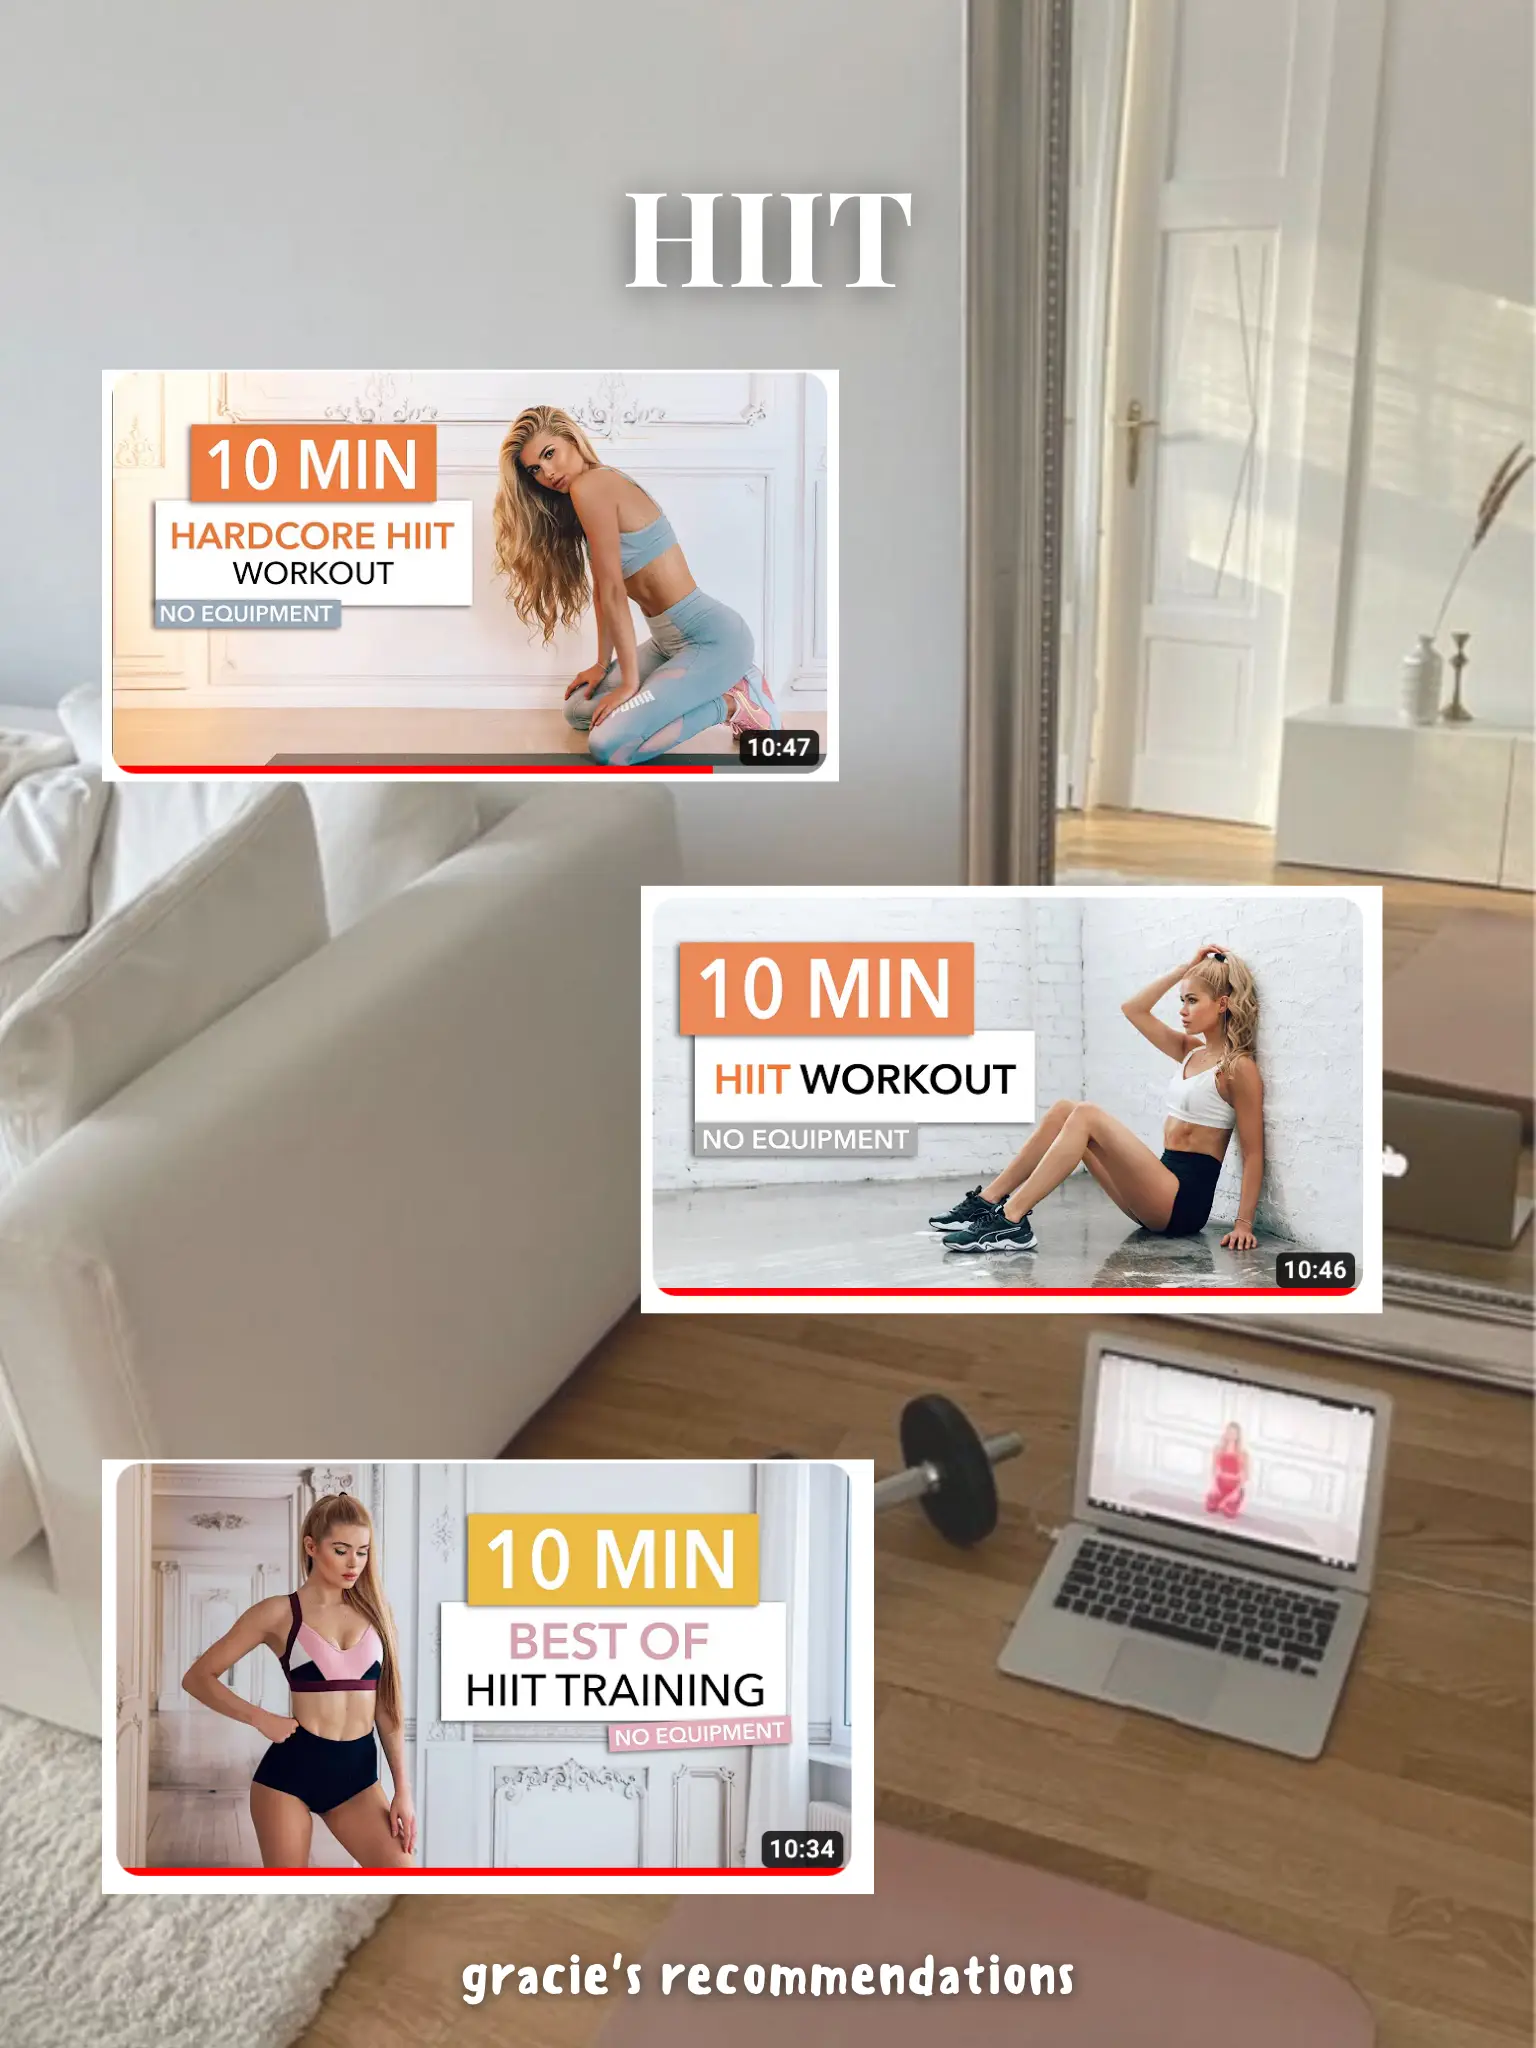 I lost 10KG just by following these videos?! 's images(2)